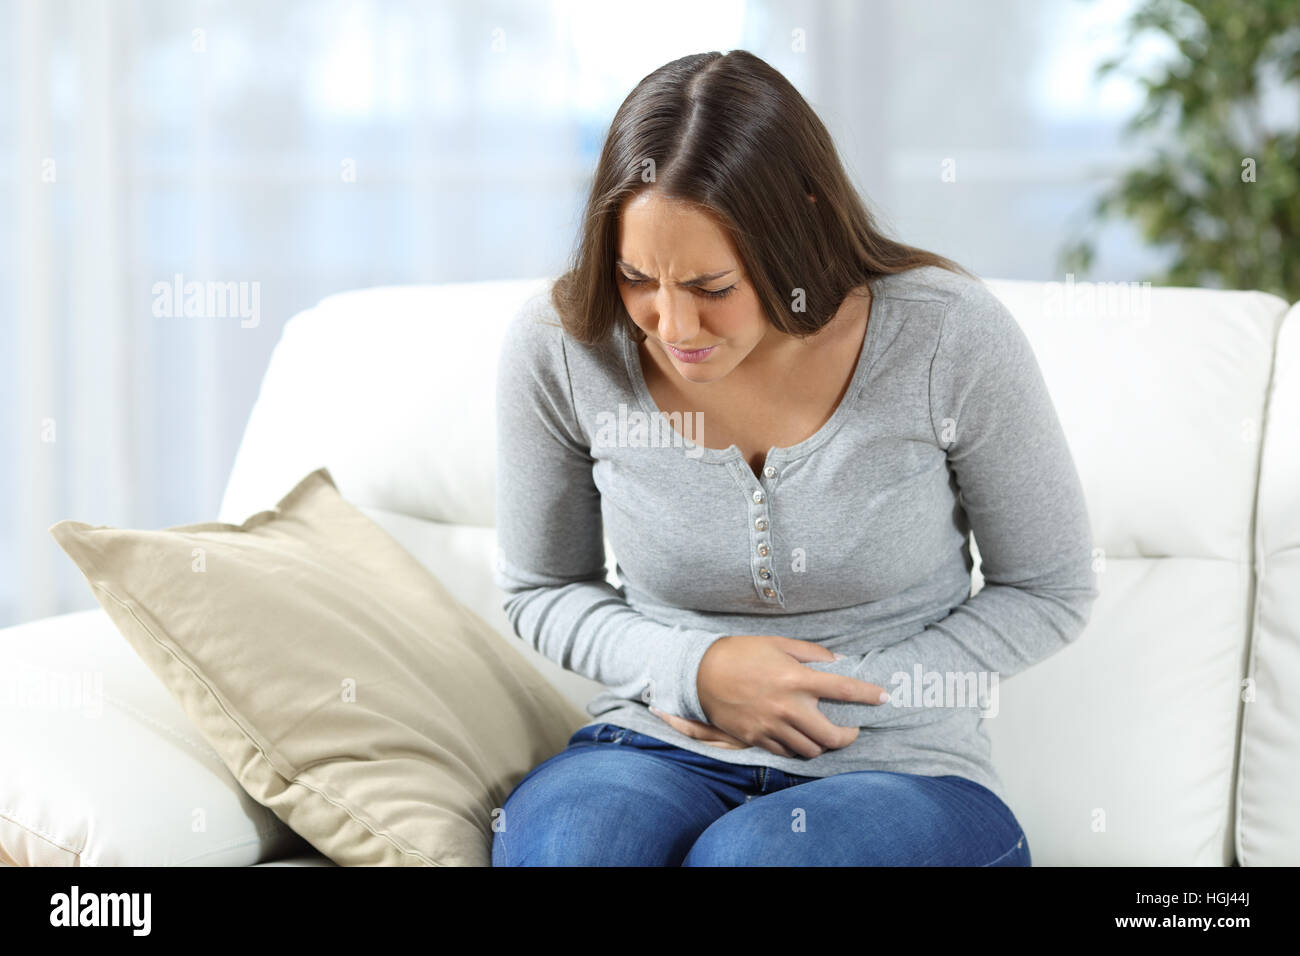 Woman suffering stomach ache and complaining sitting on a couch in the living room at home Stock Photo